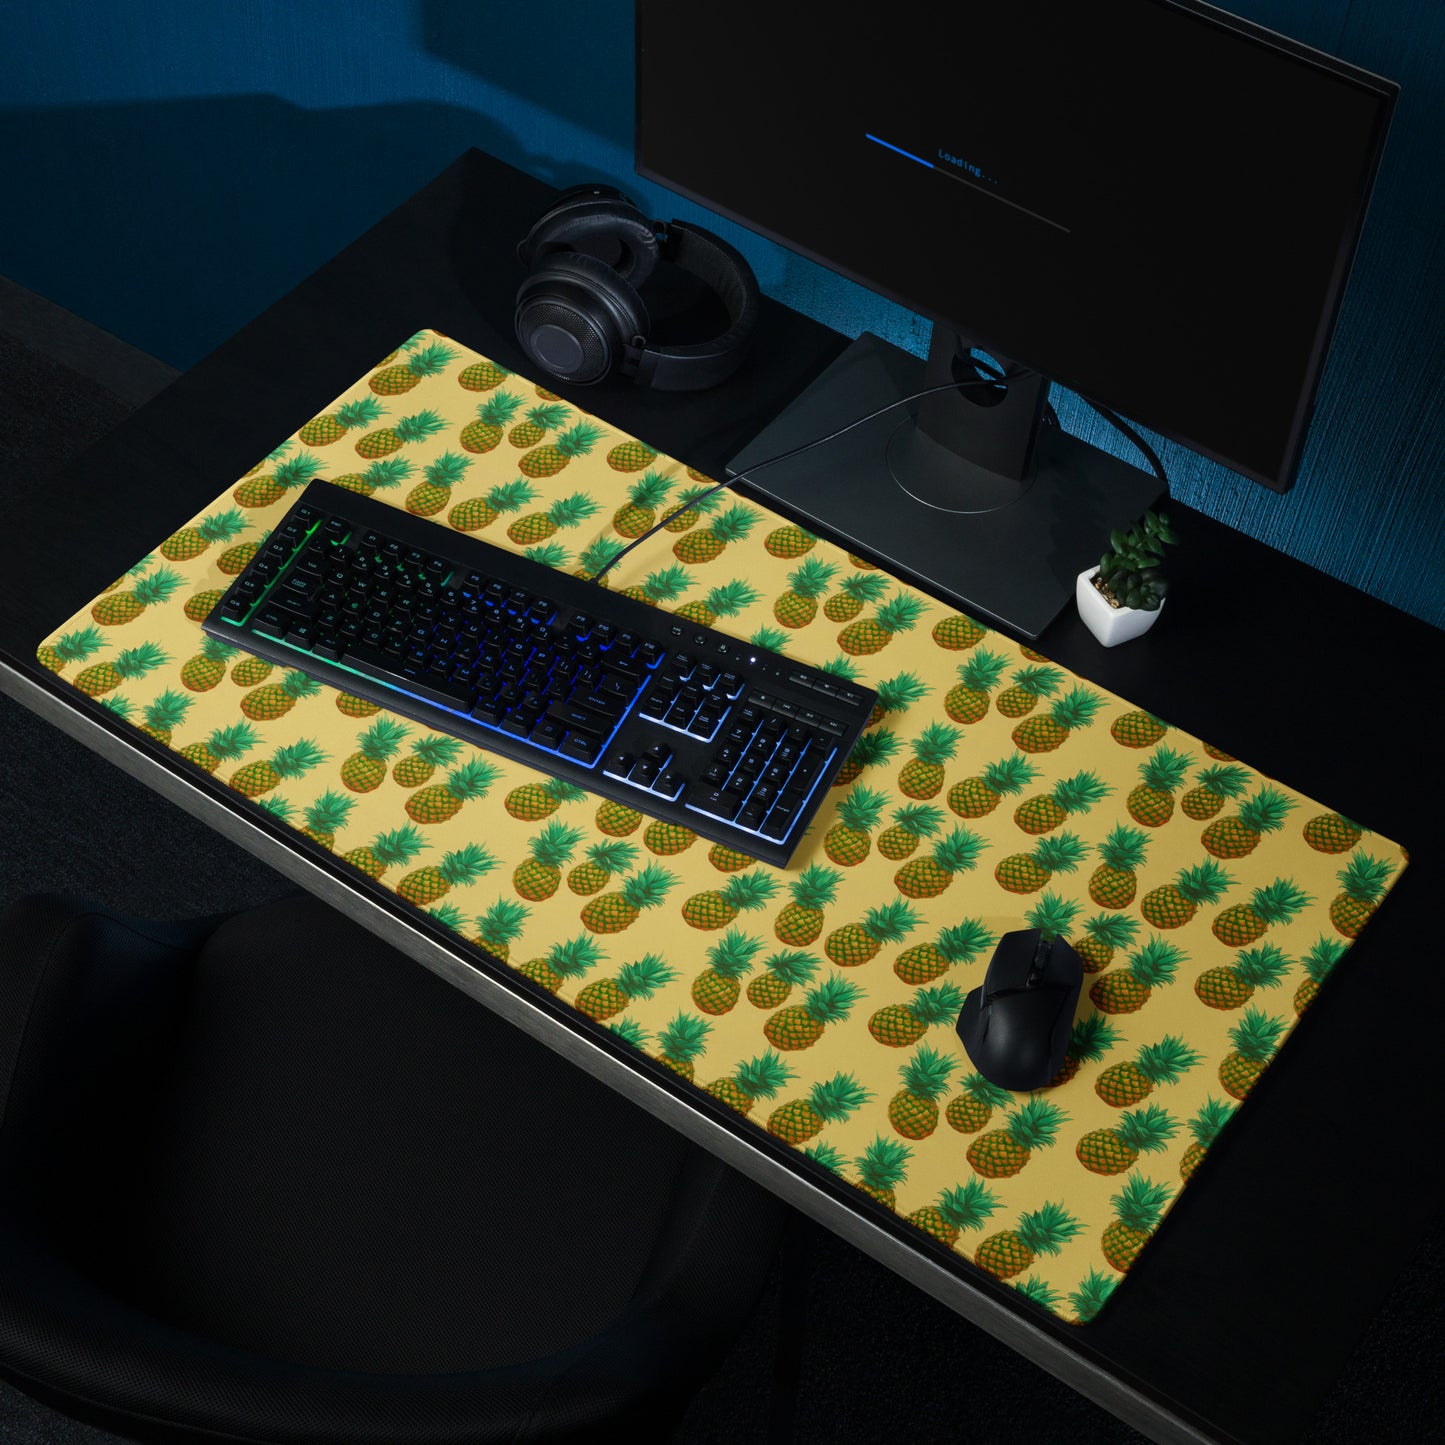 A 36" x 18" desk pad with pineapples all over it shown on a desk. Yellow in color.